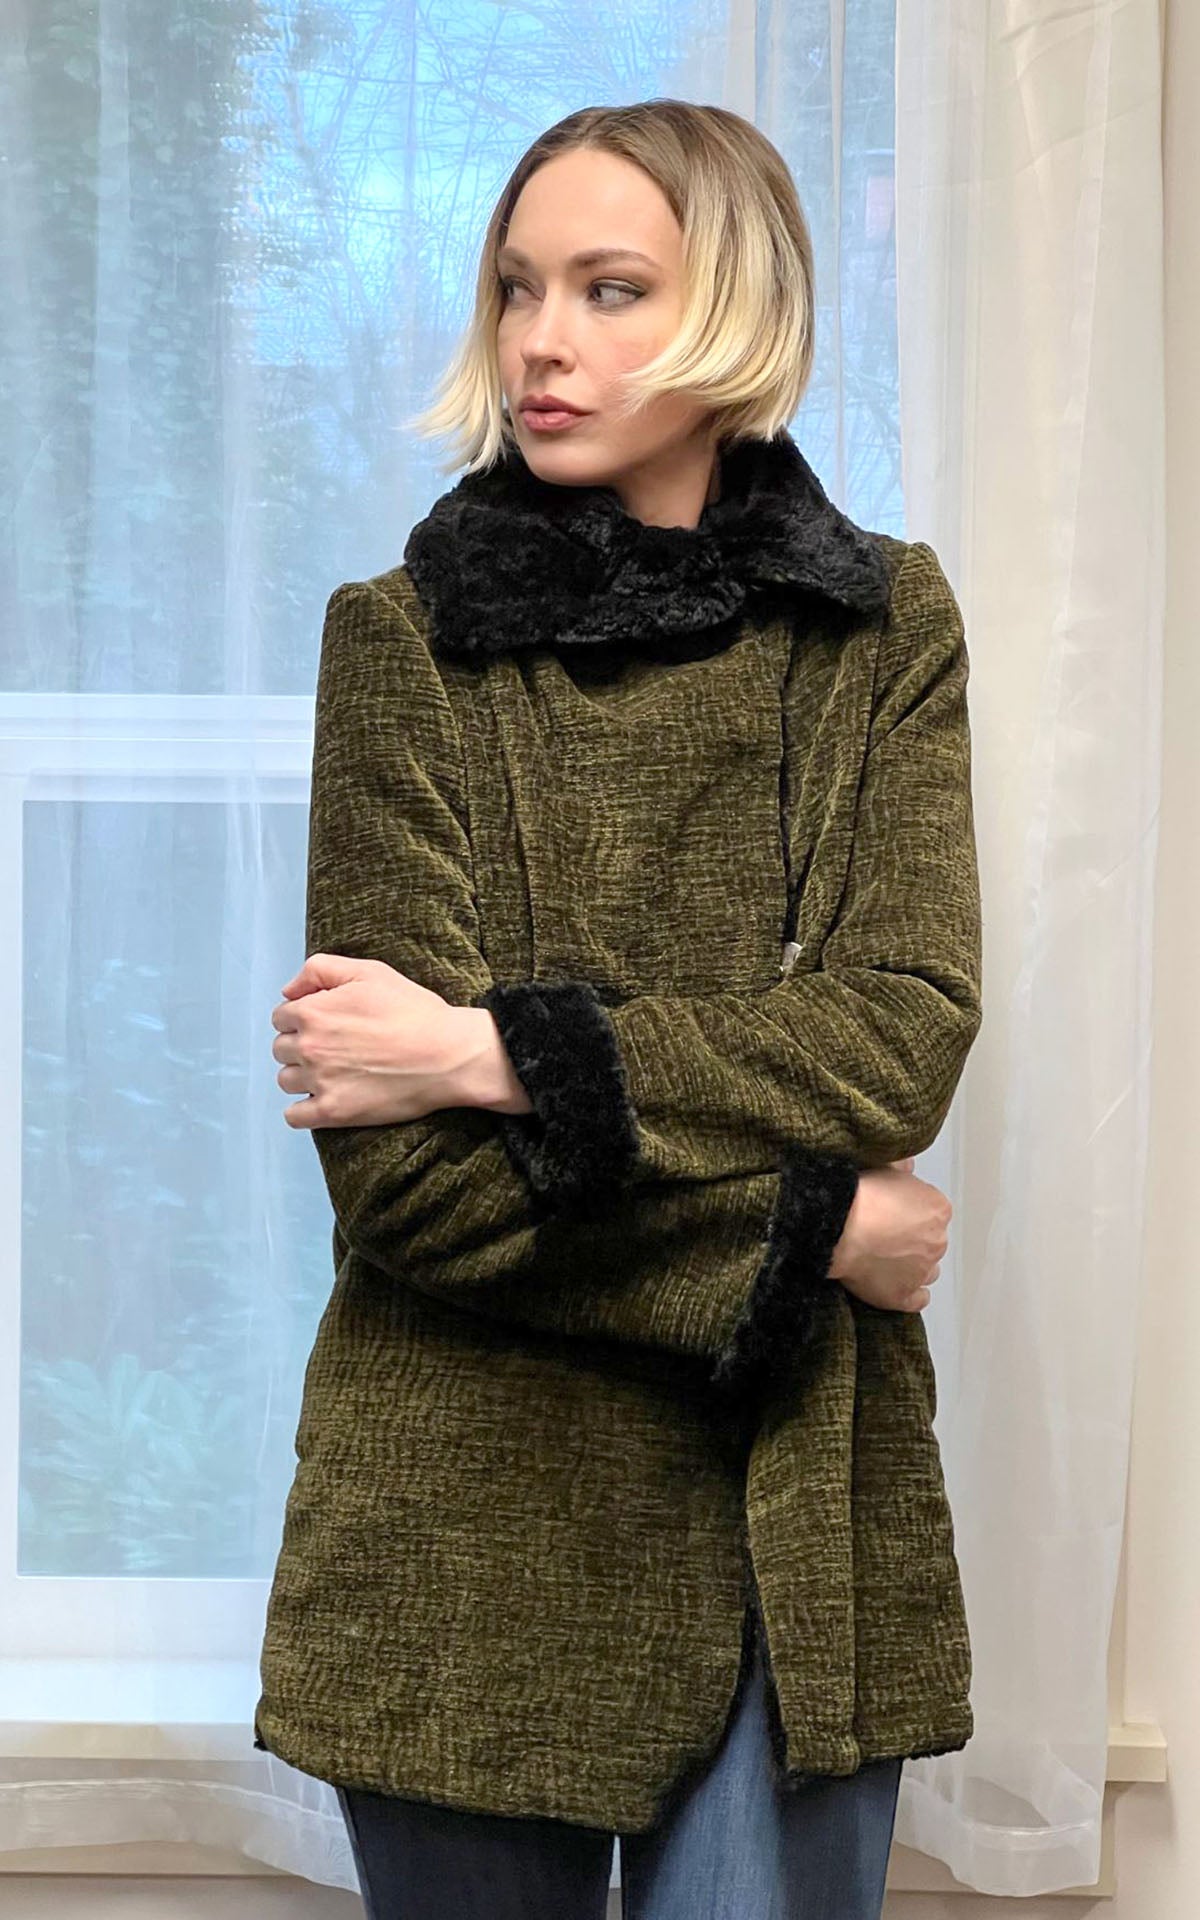 Hepburn Swing coat in olive Lancaster with black faux fur hand made in Seattle WA USA